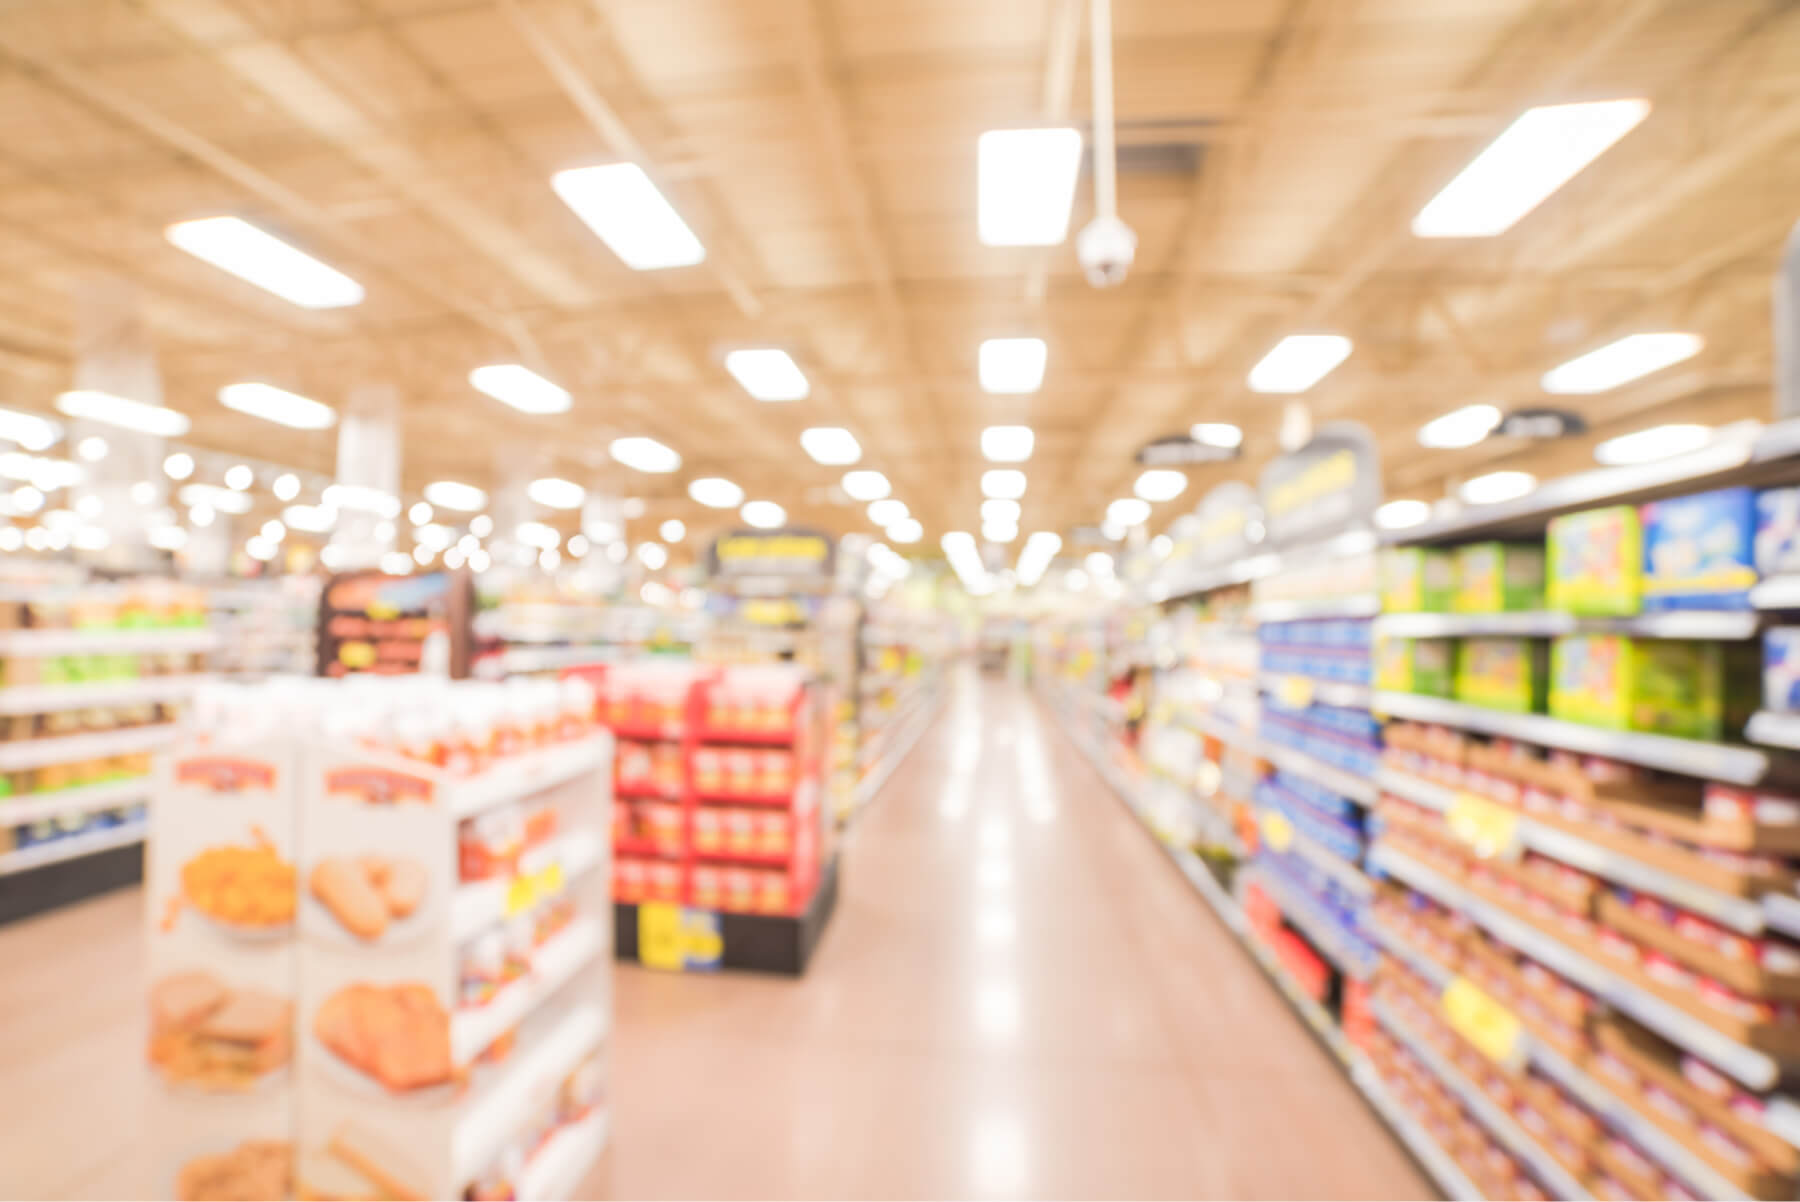 Grocery store aisles blurred